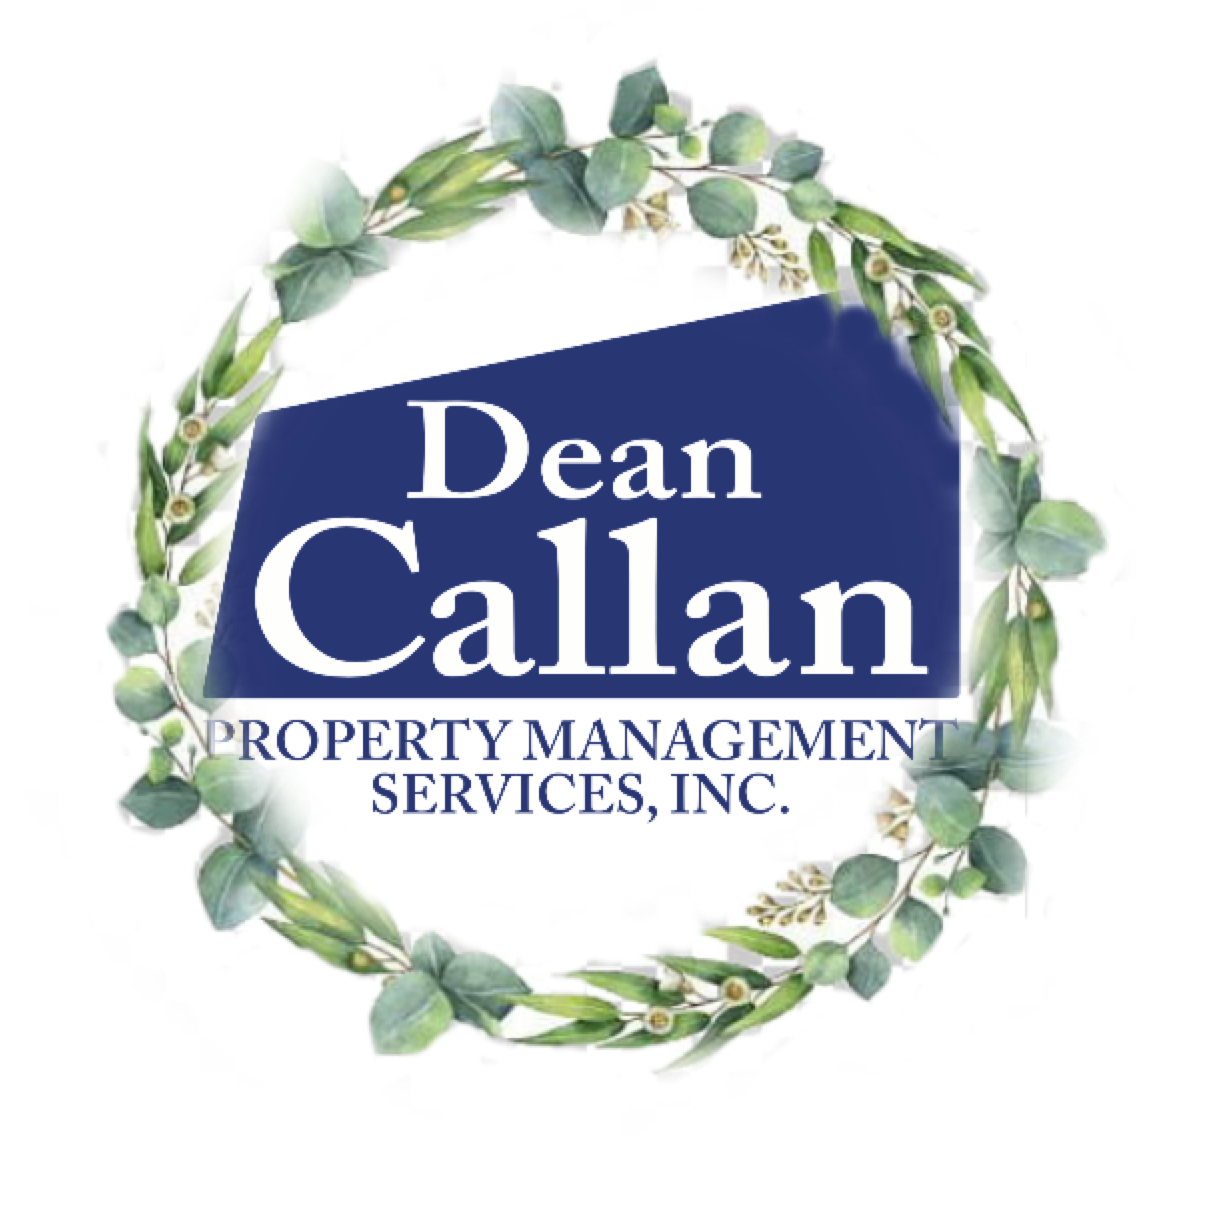 Dean Callan and Company Property Management